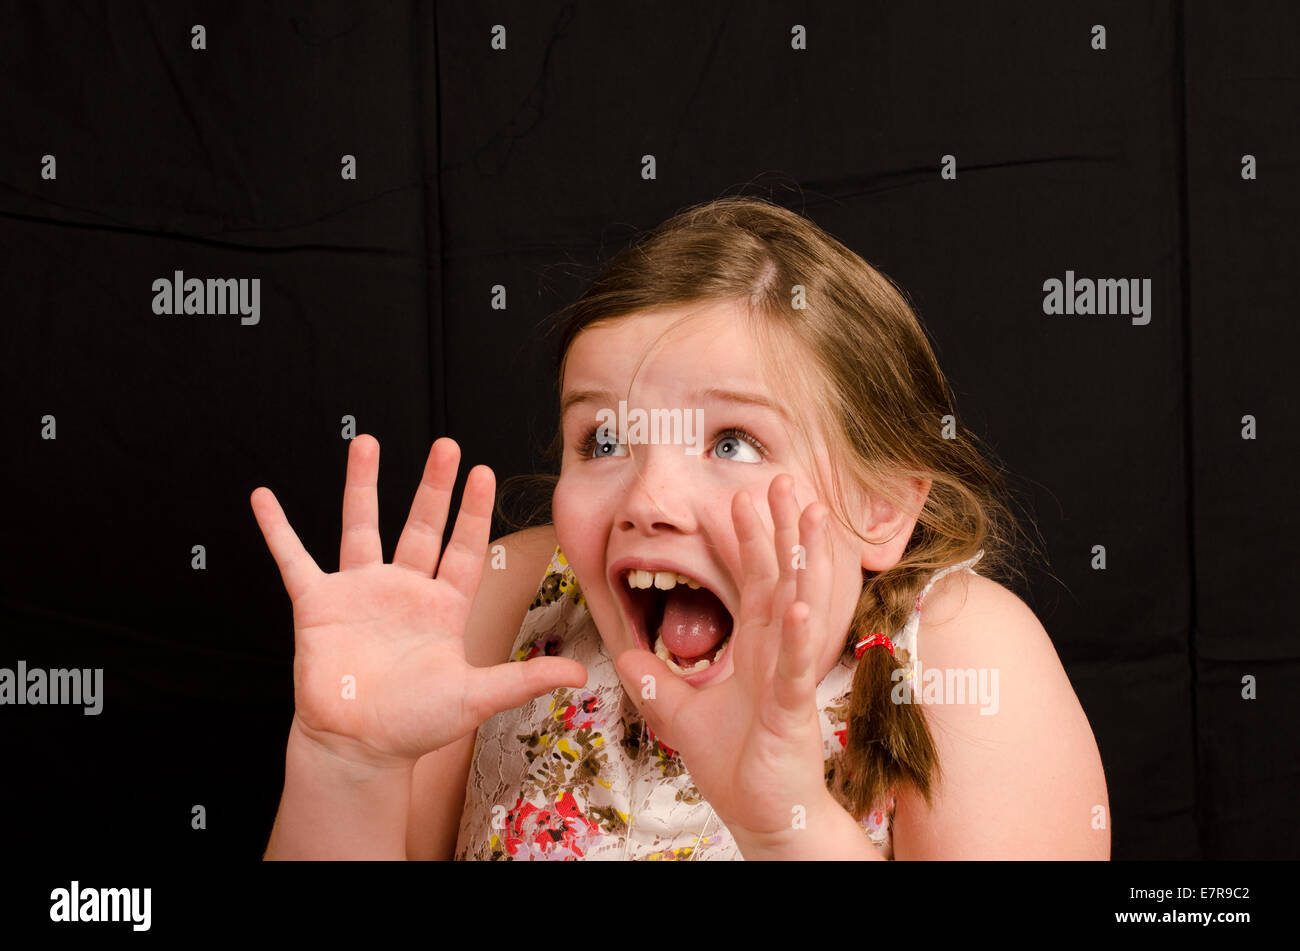 Image of an 8 year old girl on a black background with a  surprised expression Stock Photo